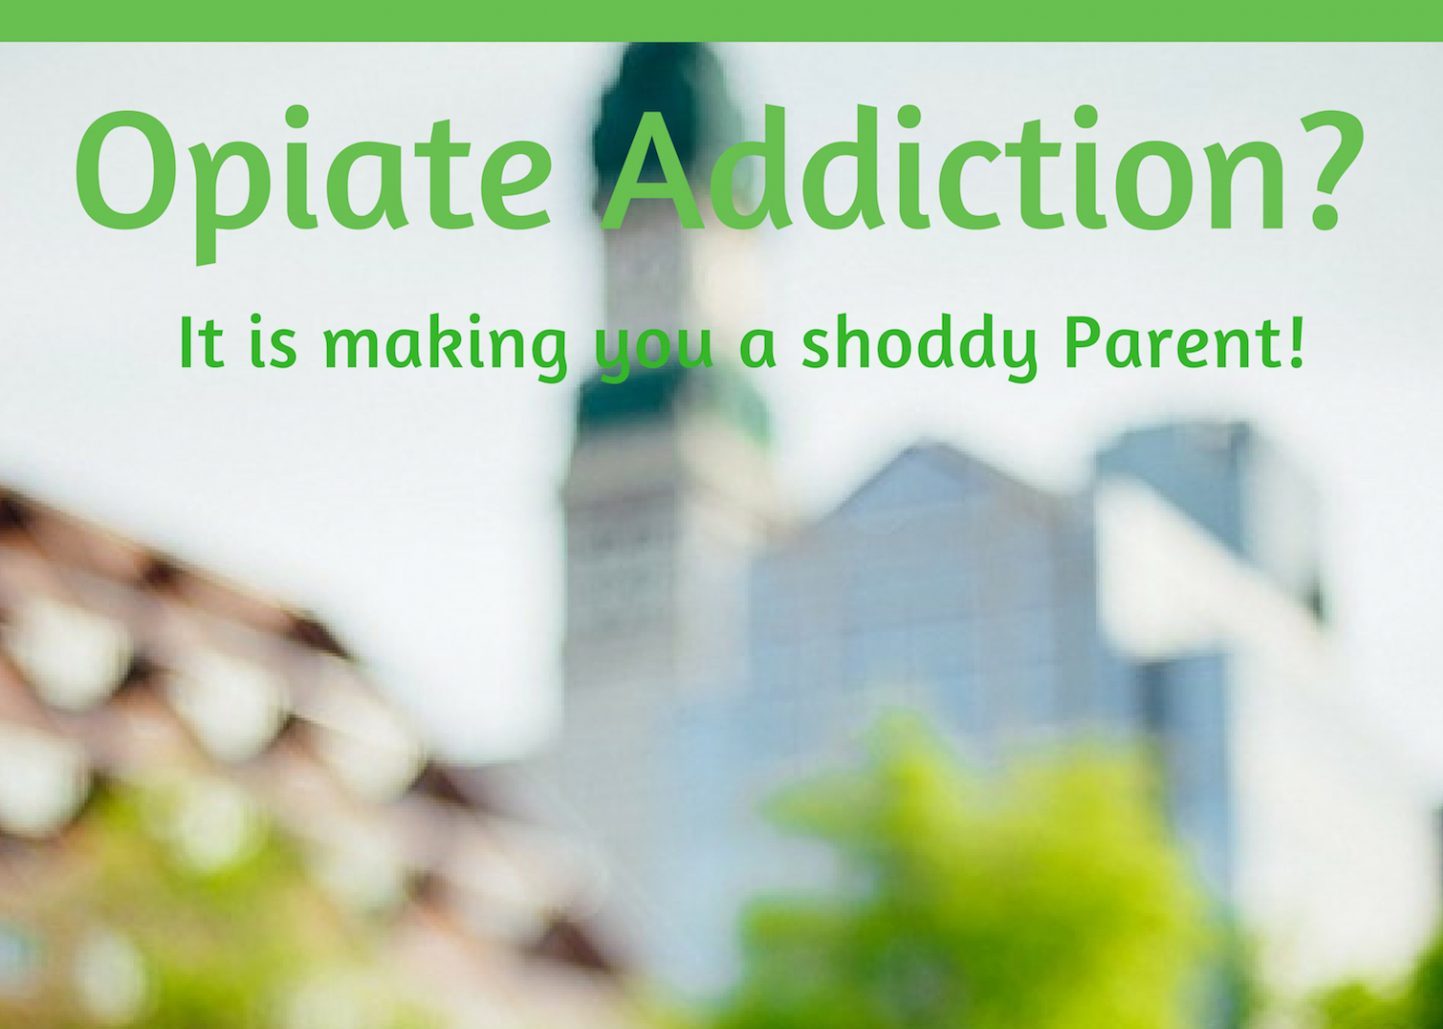 How seeking treatment for Opiate Addiction makes you a better parent?